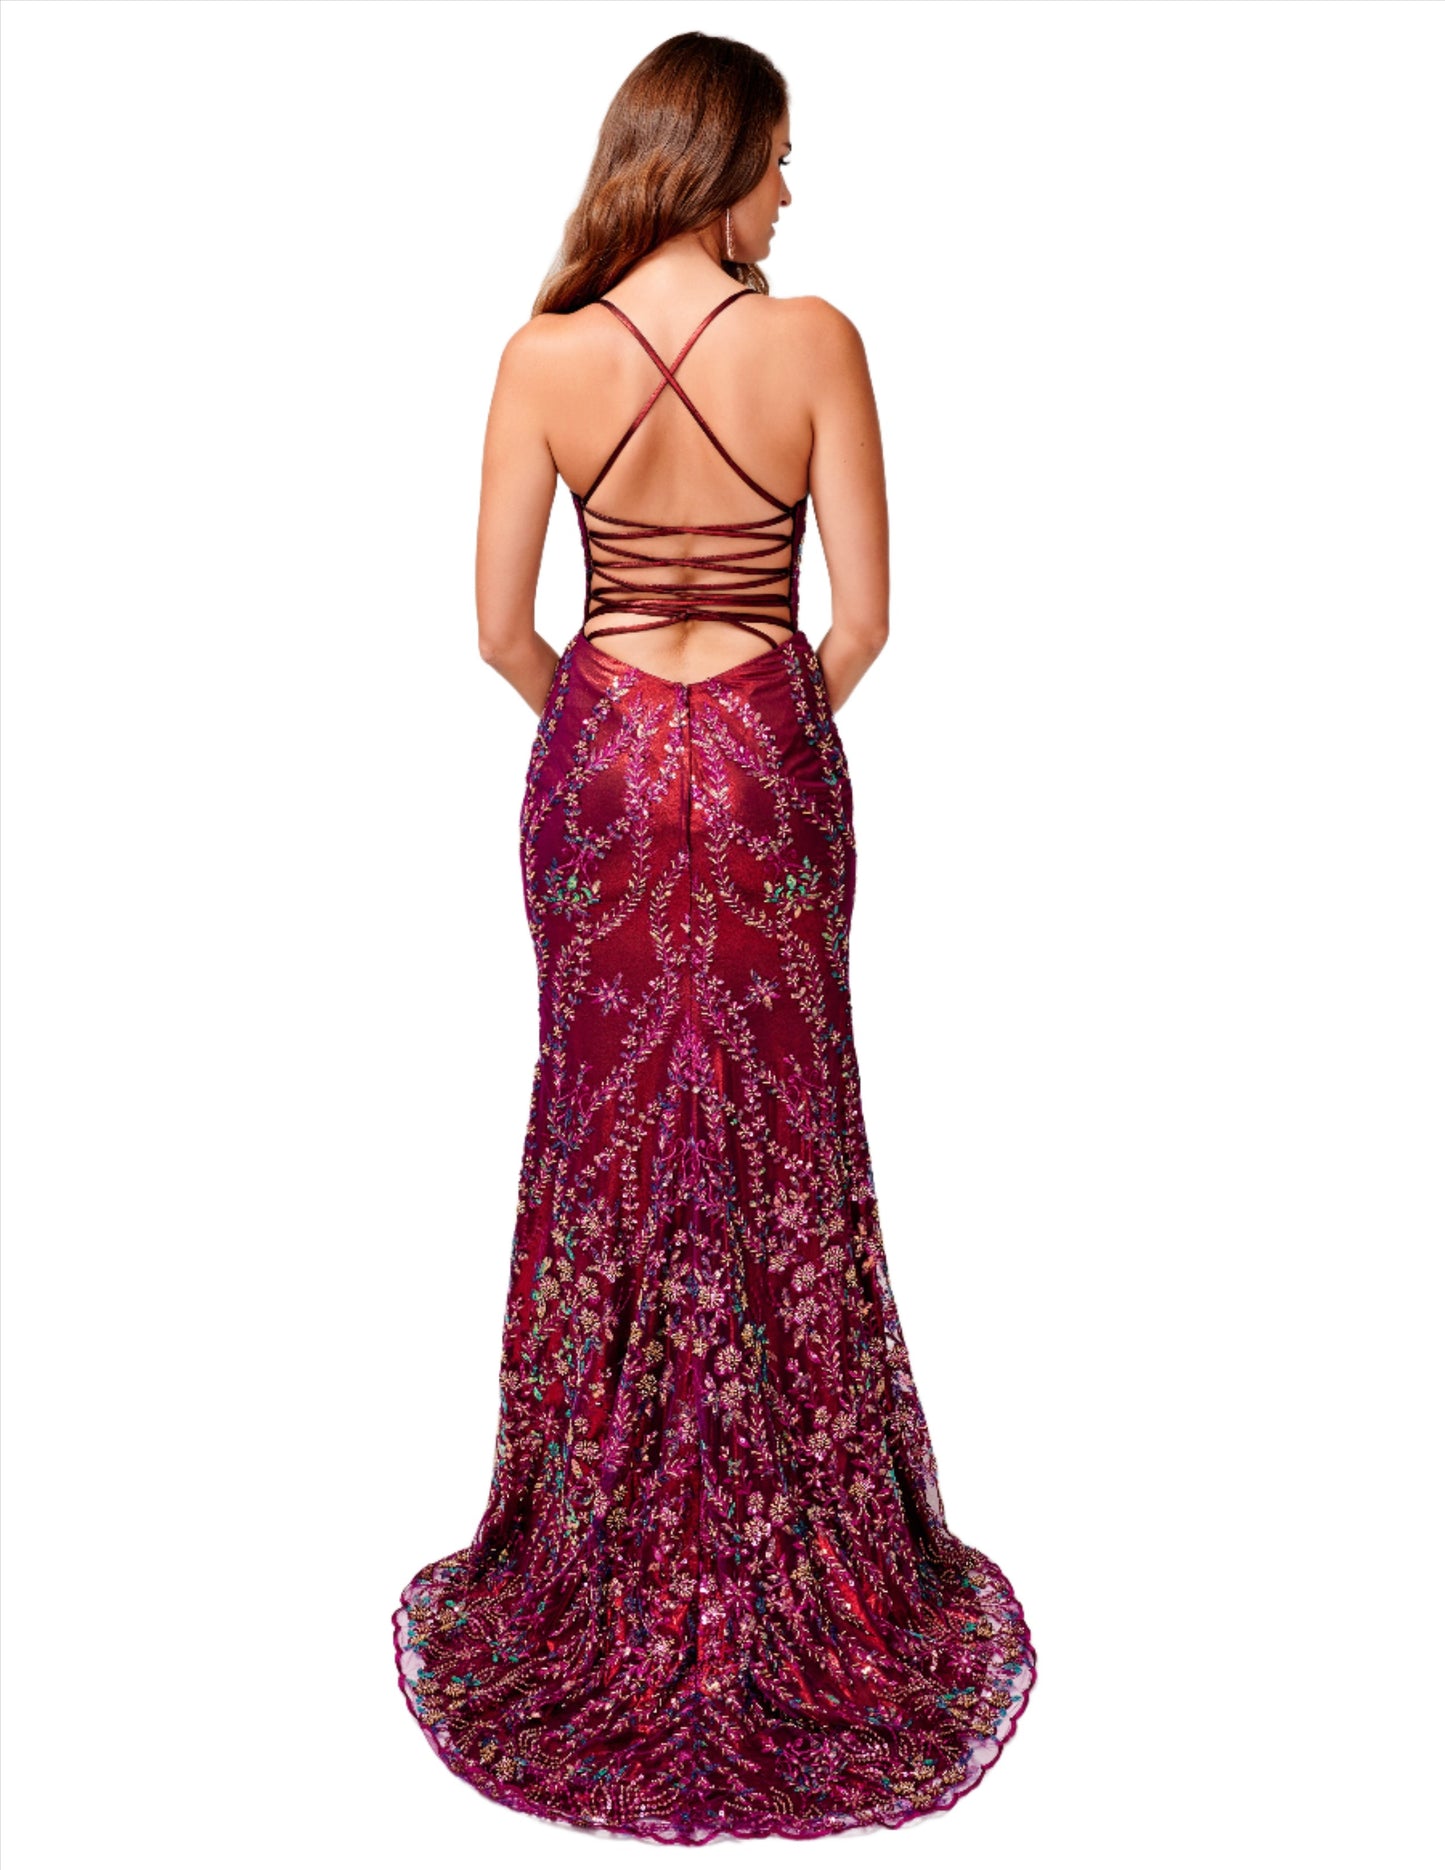 <p data-mce-fragment="1">Nina Canacci 2380 presents a stunning formal dress with a metallic shimmer and intricate beaded detailing. Perfect for prom or an evening event. backless corset dress. Dress to impress with a touch of maroon sophistication.</p> <p data-mce-fragment="1">Sizes: 0, 4, 10</p> <p data-mce-fragment="1">Colors: Maroon</p>